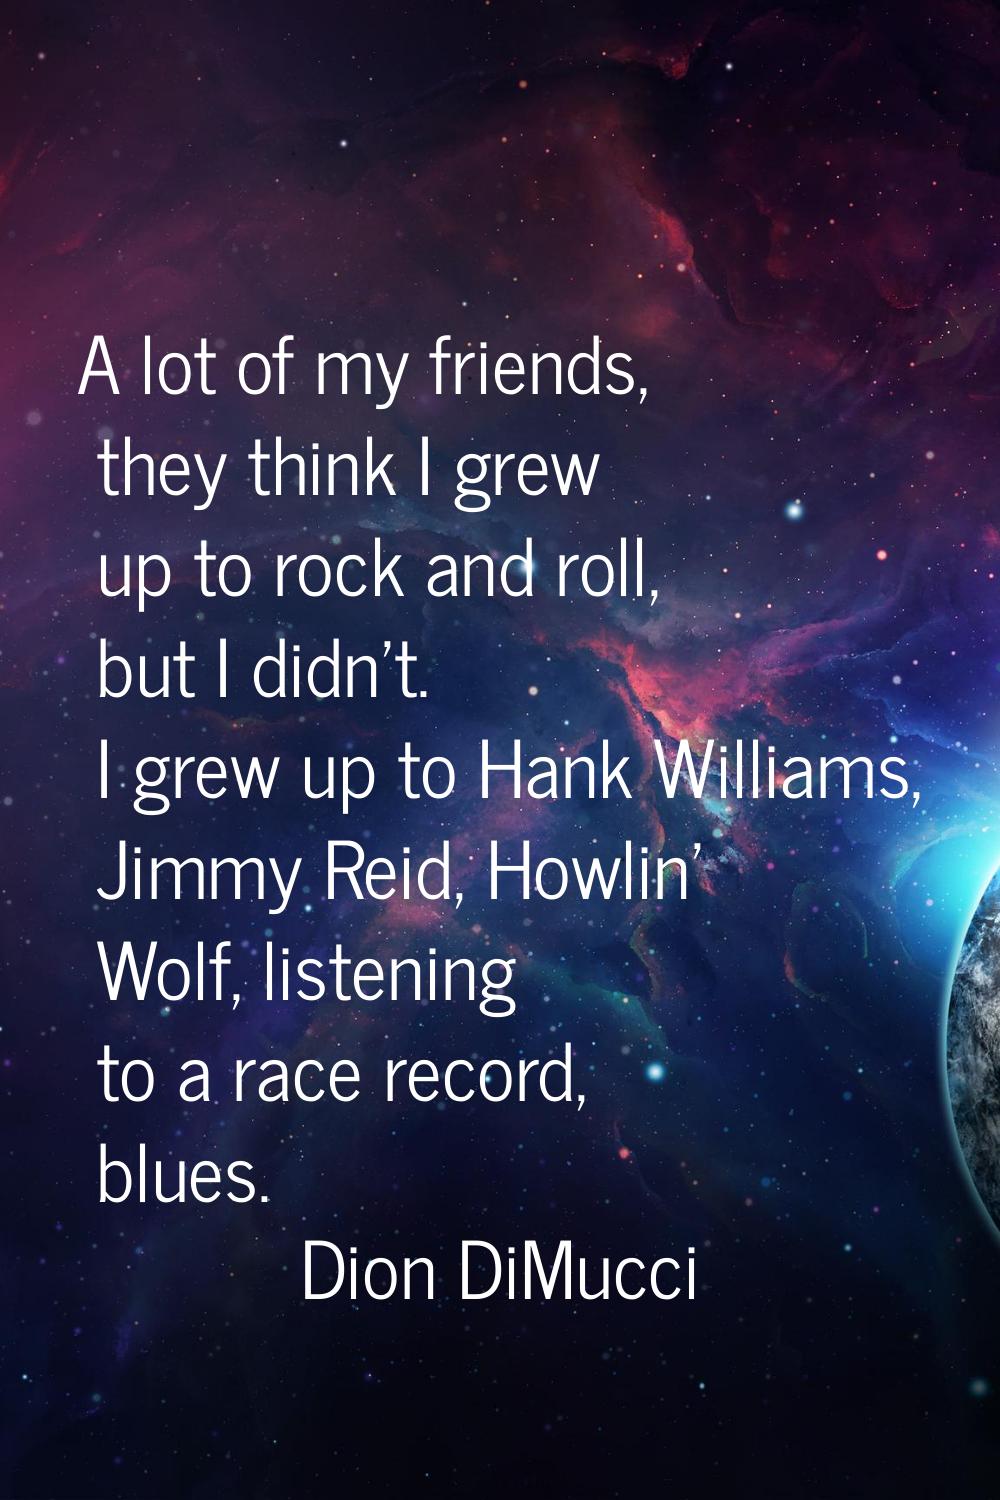 A lot of my friends, they think I grew up to rock and roll, but I didn't. I grew up to Hank William